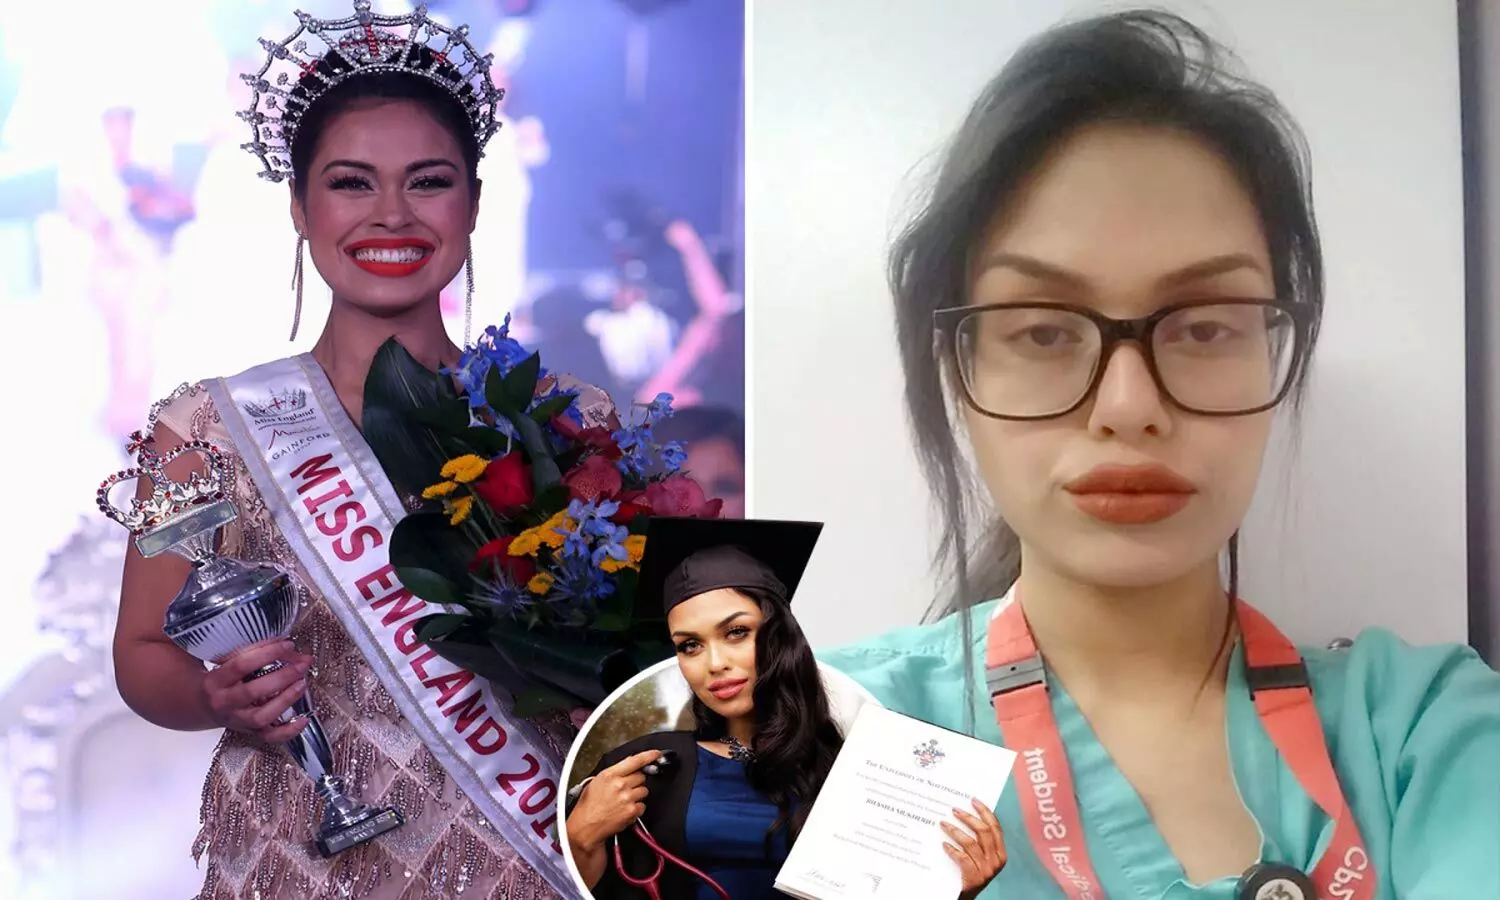 Covid-19: Miss England Dr Bhasha Mukherjee gets vaccinated, endorses safety